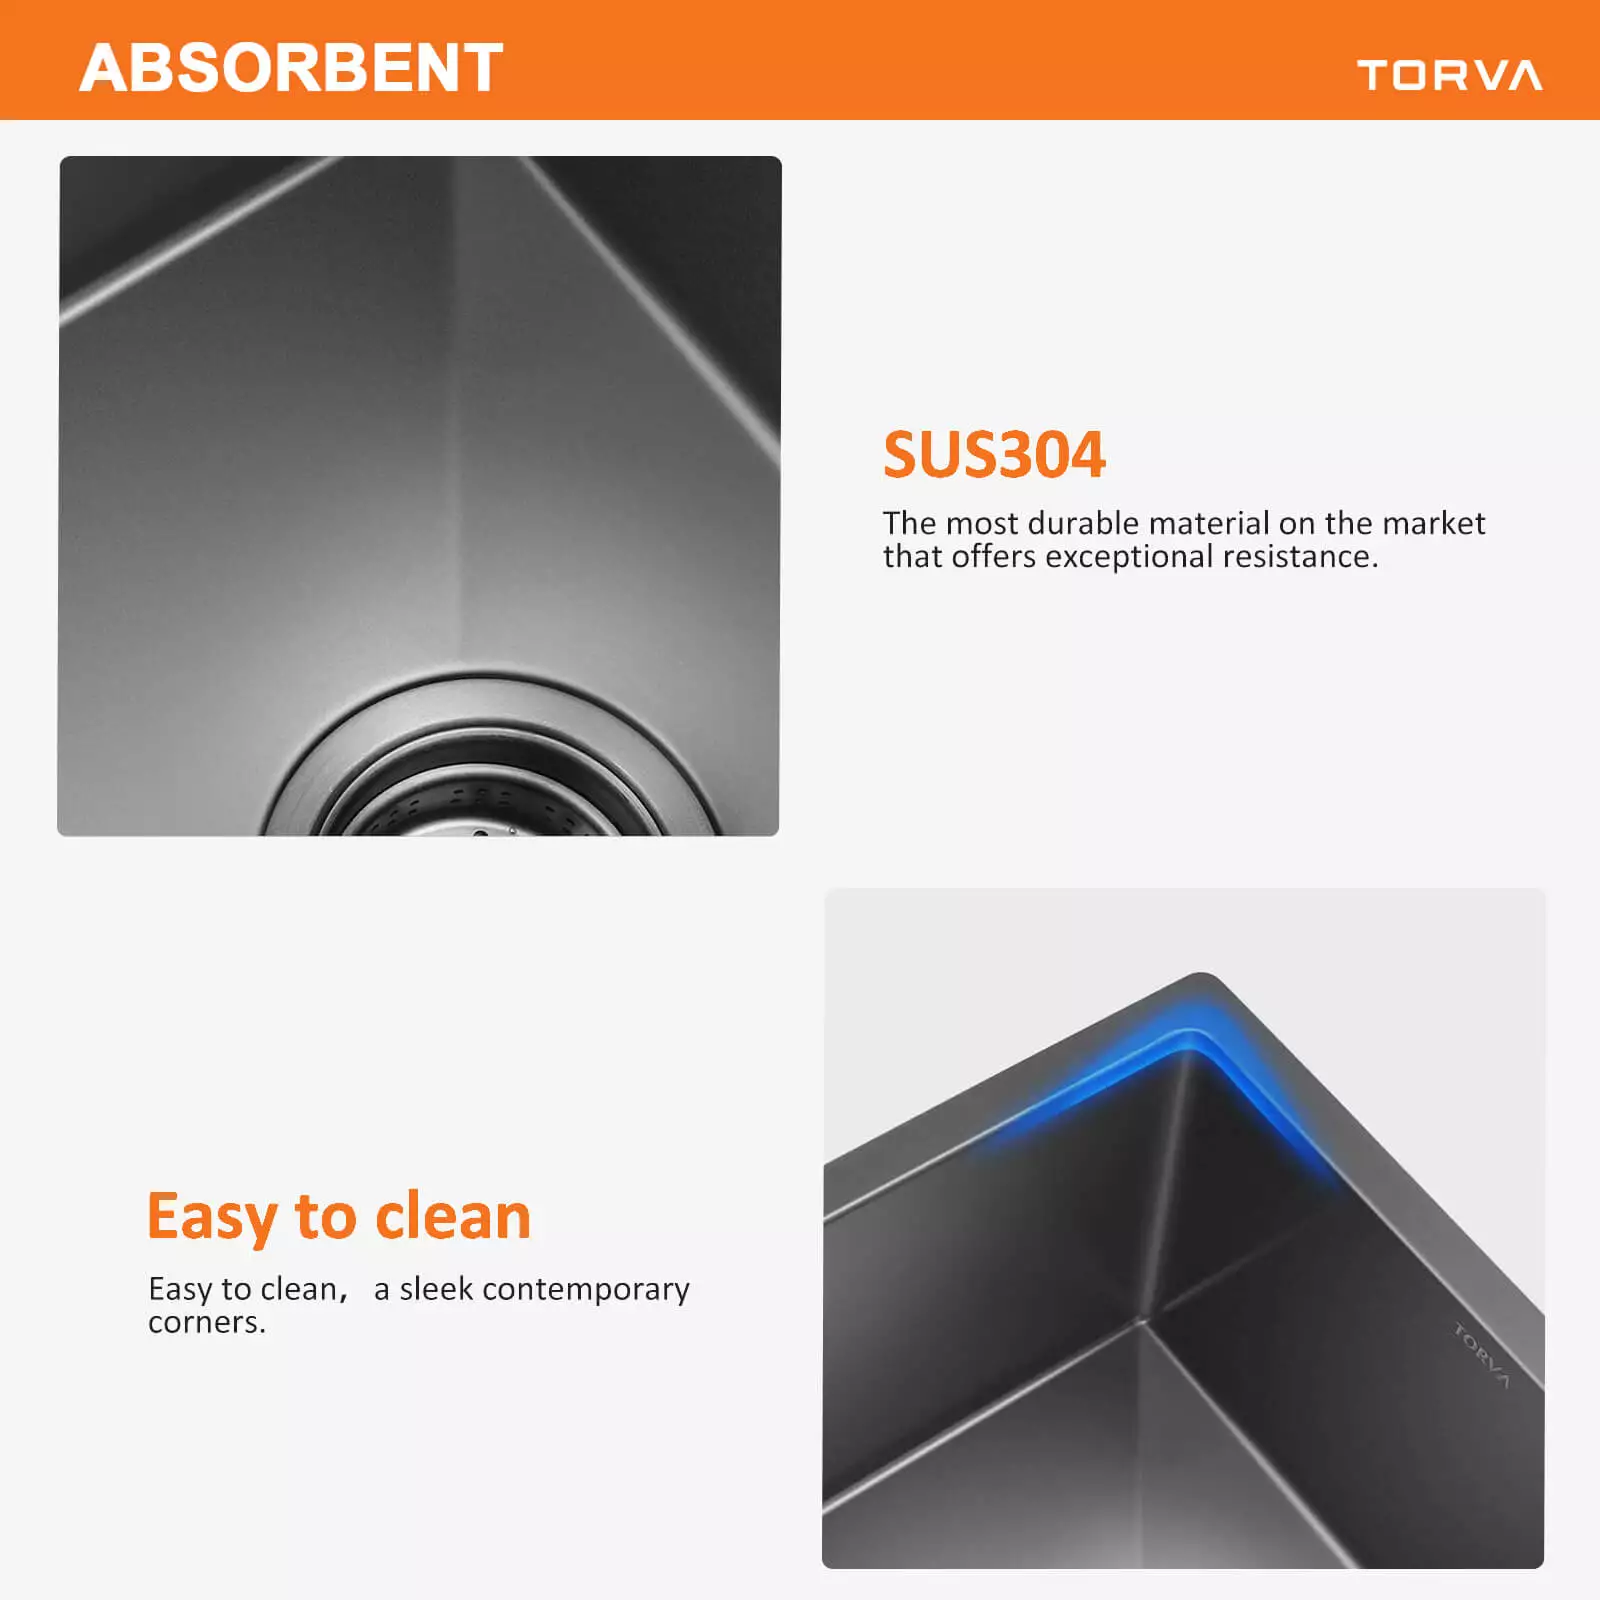 torva-sink-easy-to-clean